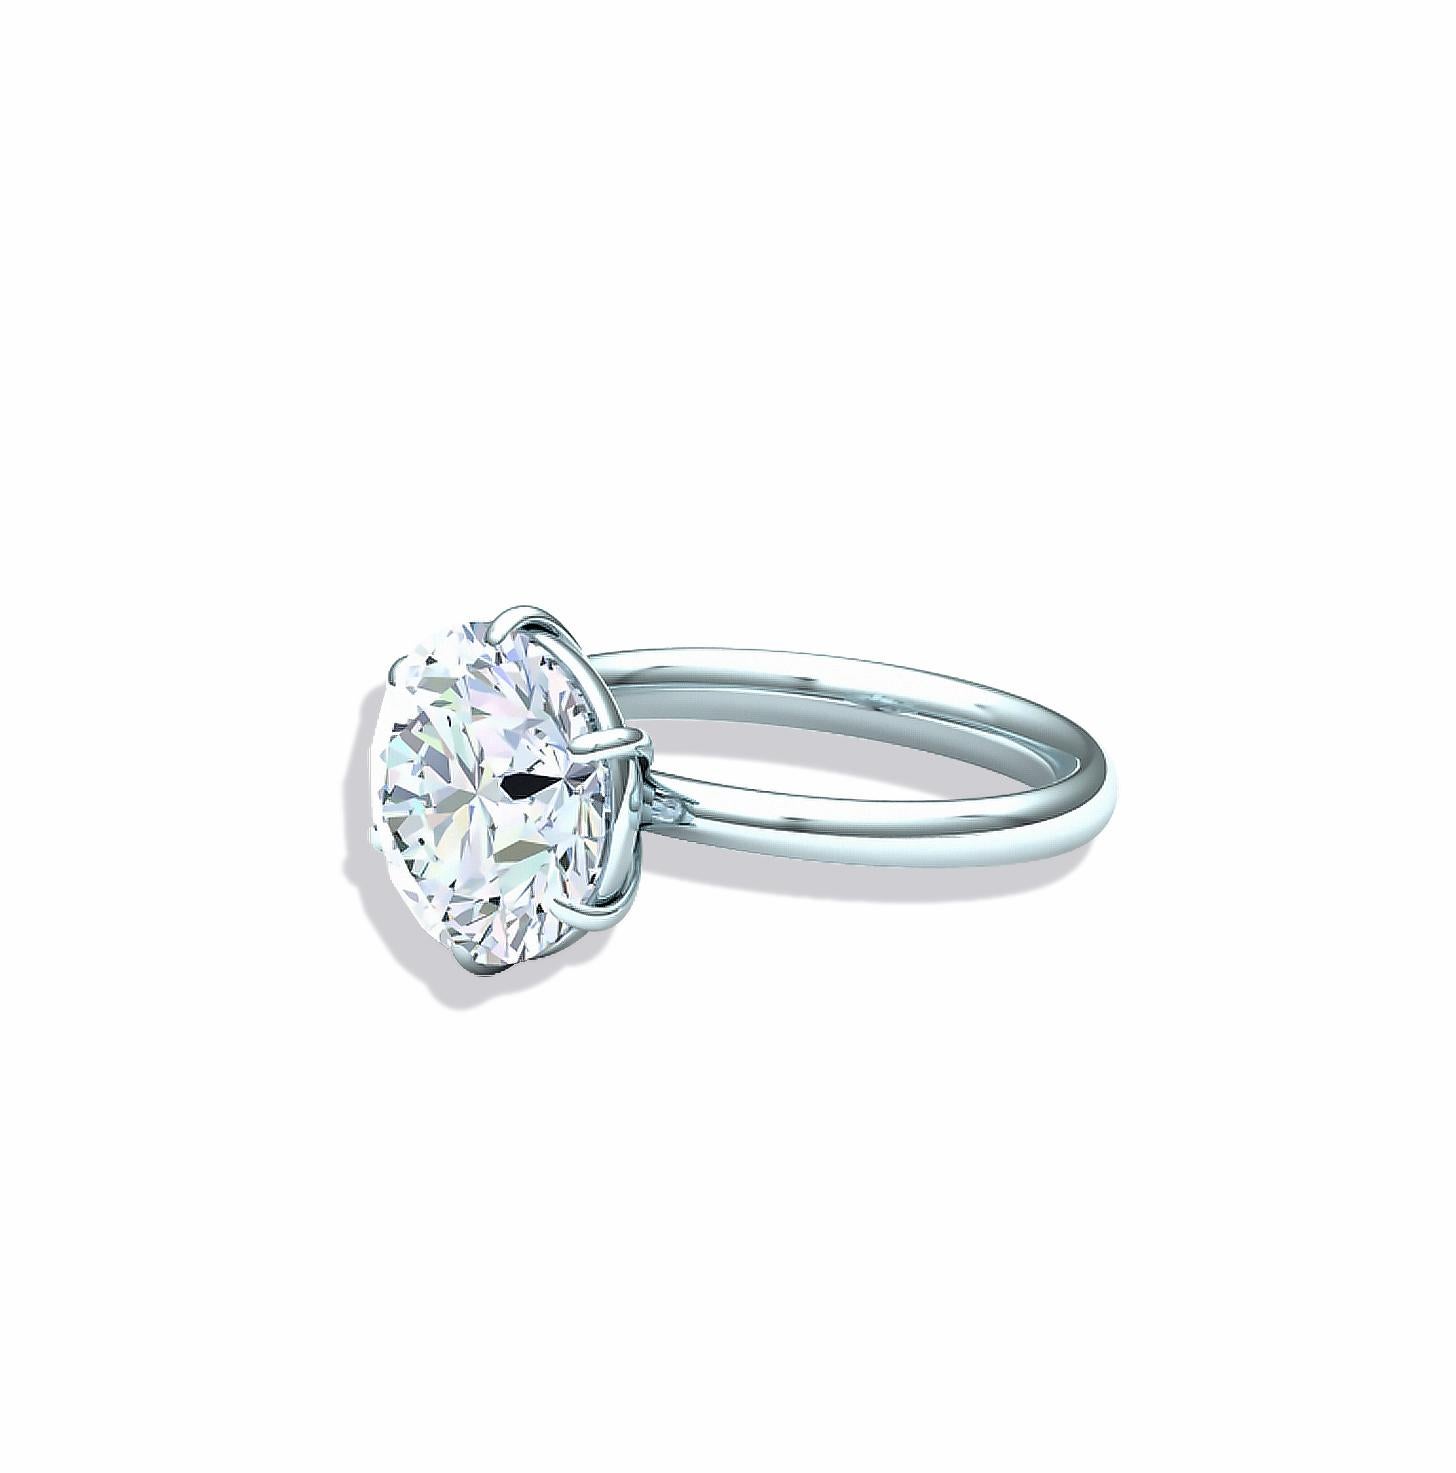 This gorgeous stone could be overlooked if you don't get to see it in person.  This stunning 4.5 carat K-VS1 AGS certified round brilliant diamond is one of the best of its kind we have personally seen in over 50 years.  This diamond came out of an